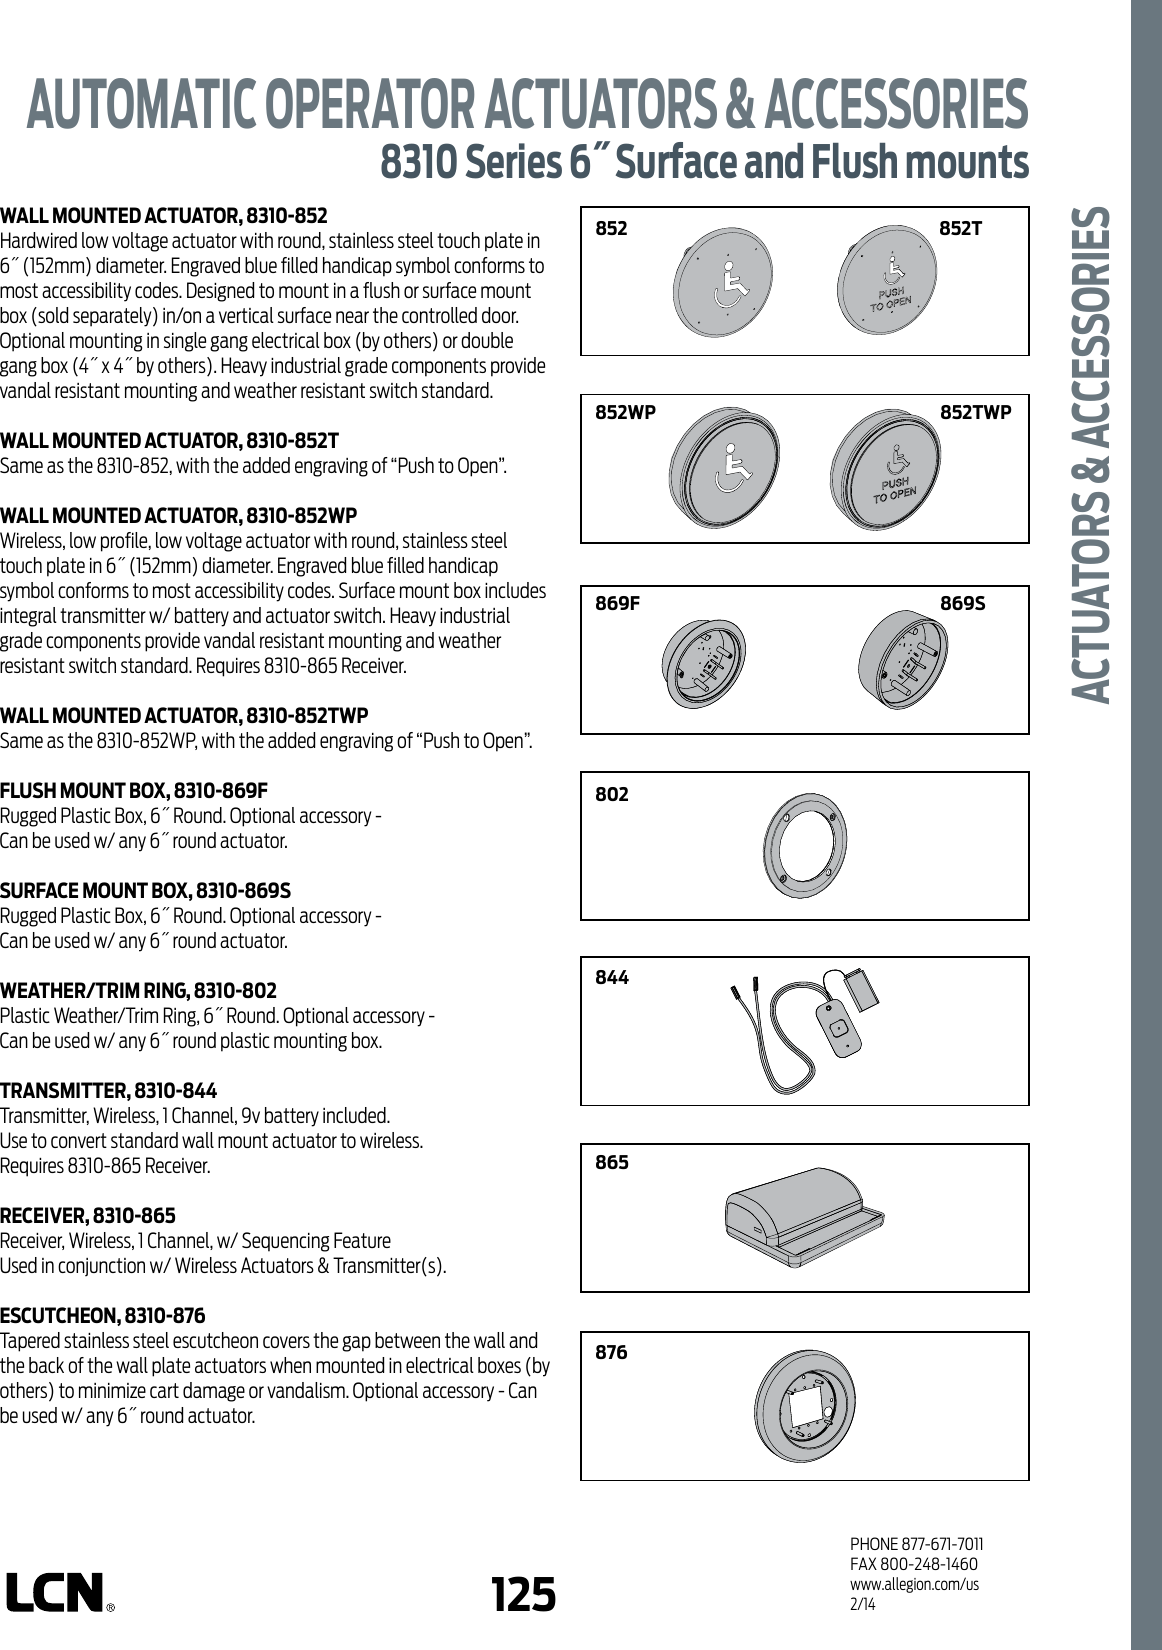 Page 3 of 9 - LCN  8310 Series Automatic Operator Actuators & Accessories Cut Sheet